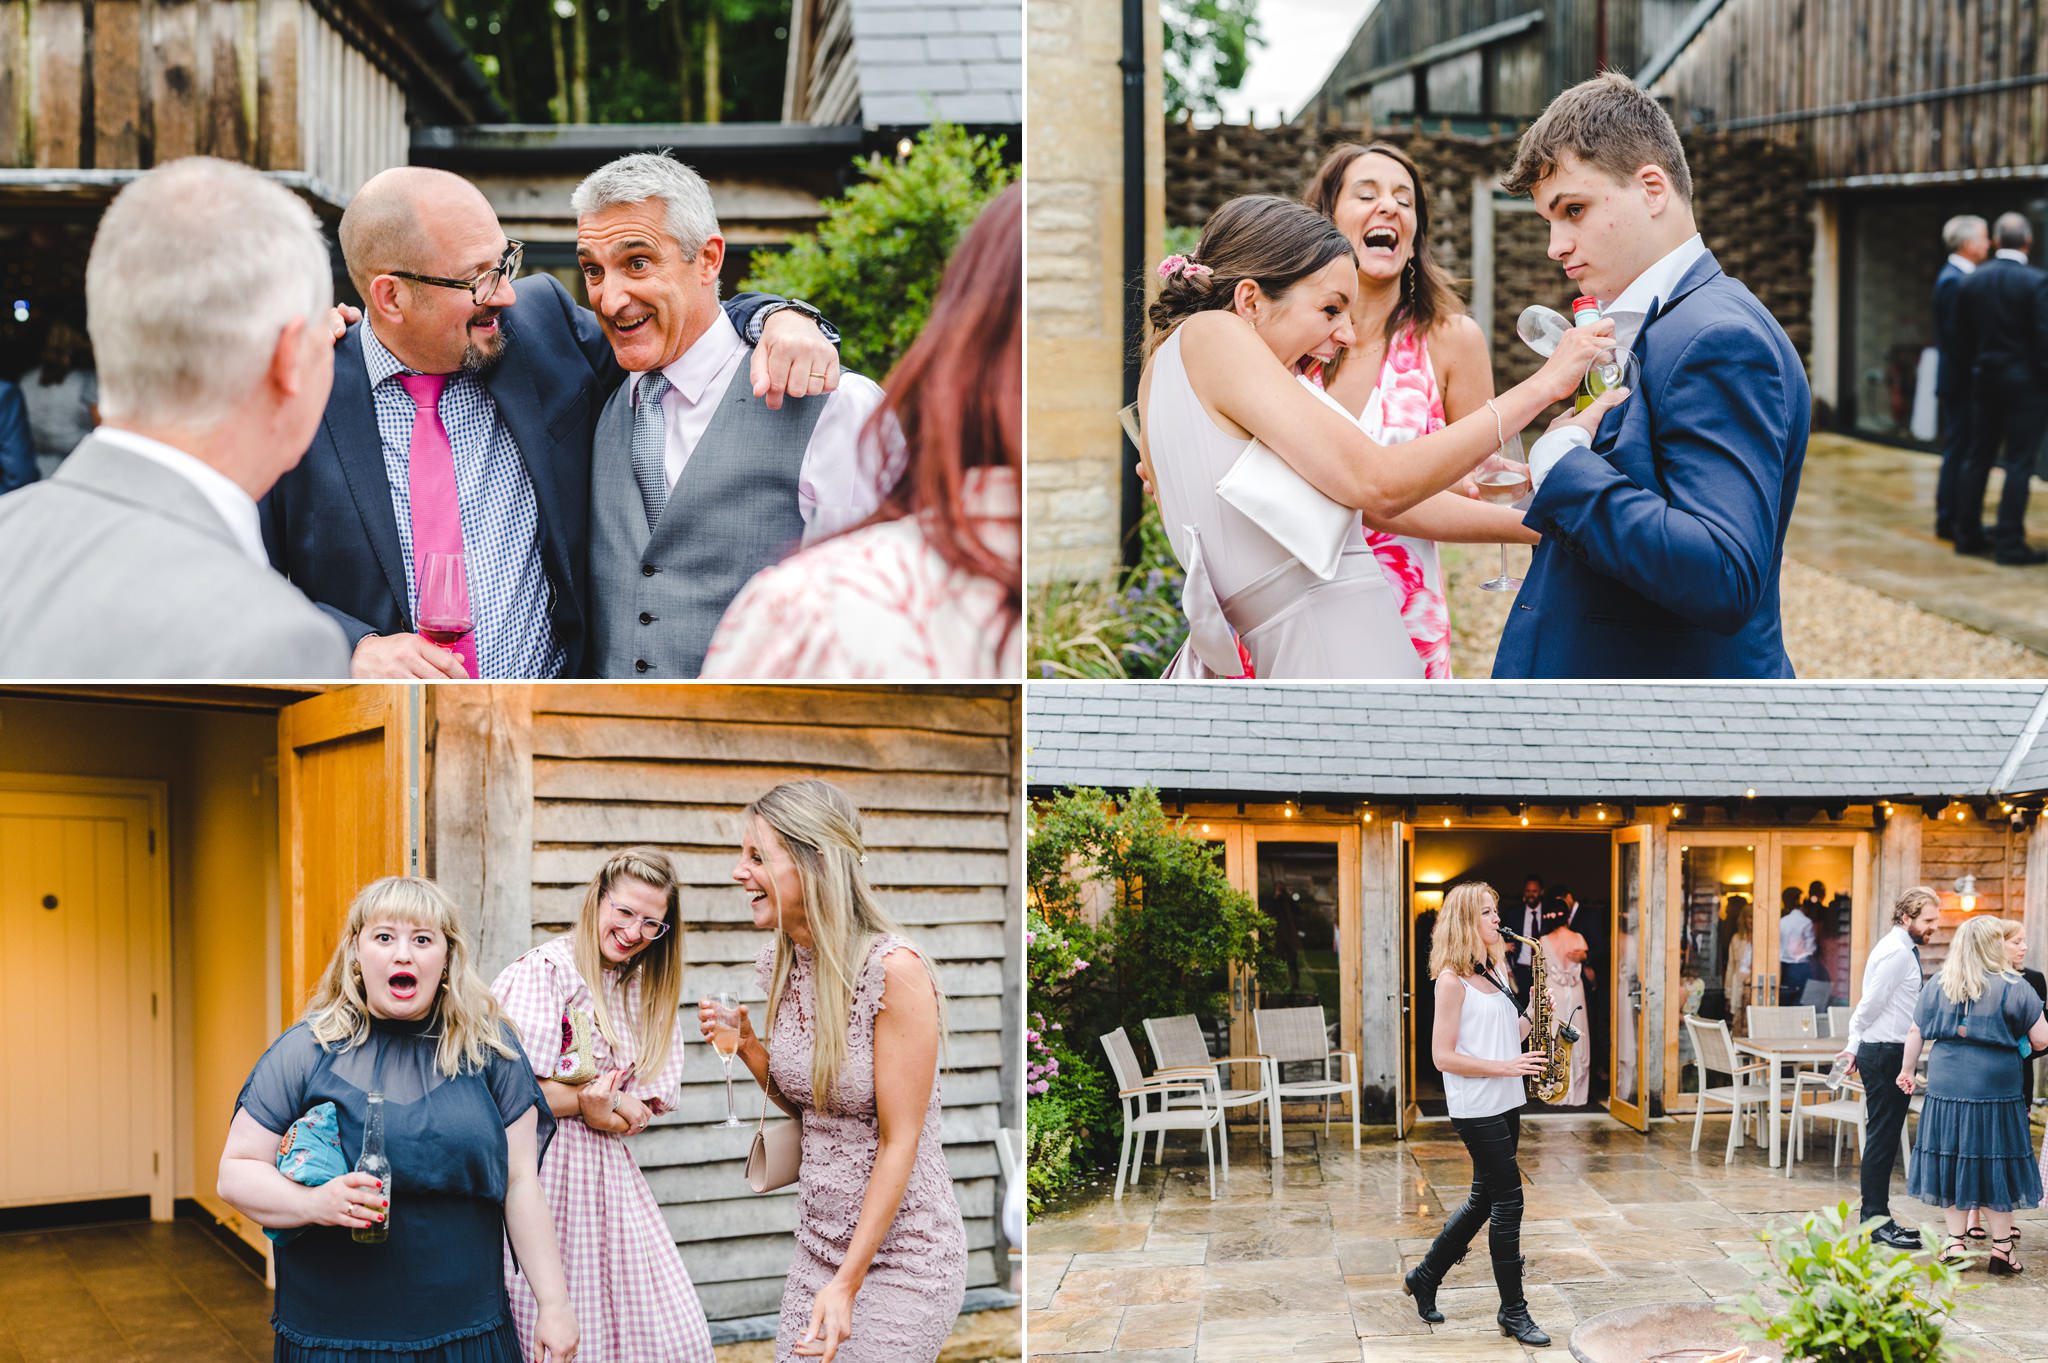 Evening reception in the courtyard at The Barn at Upcote